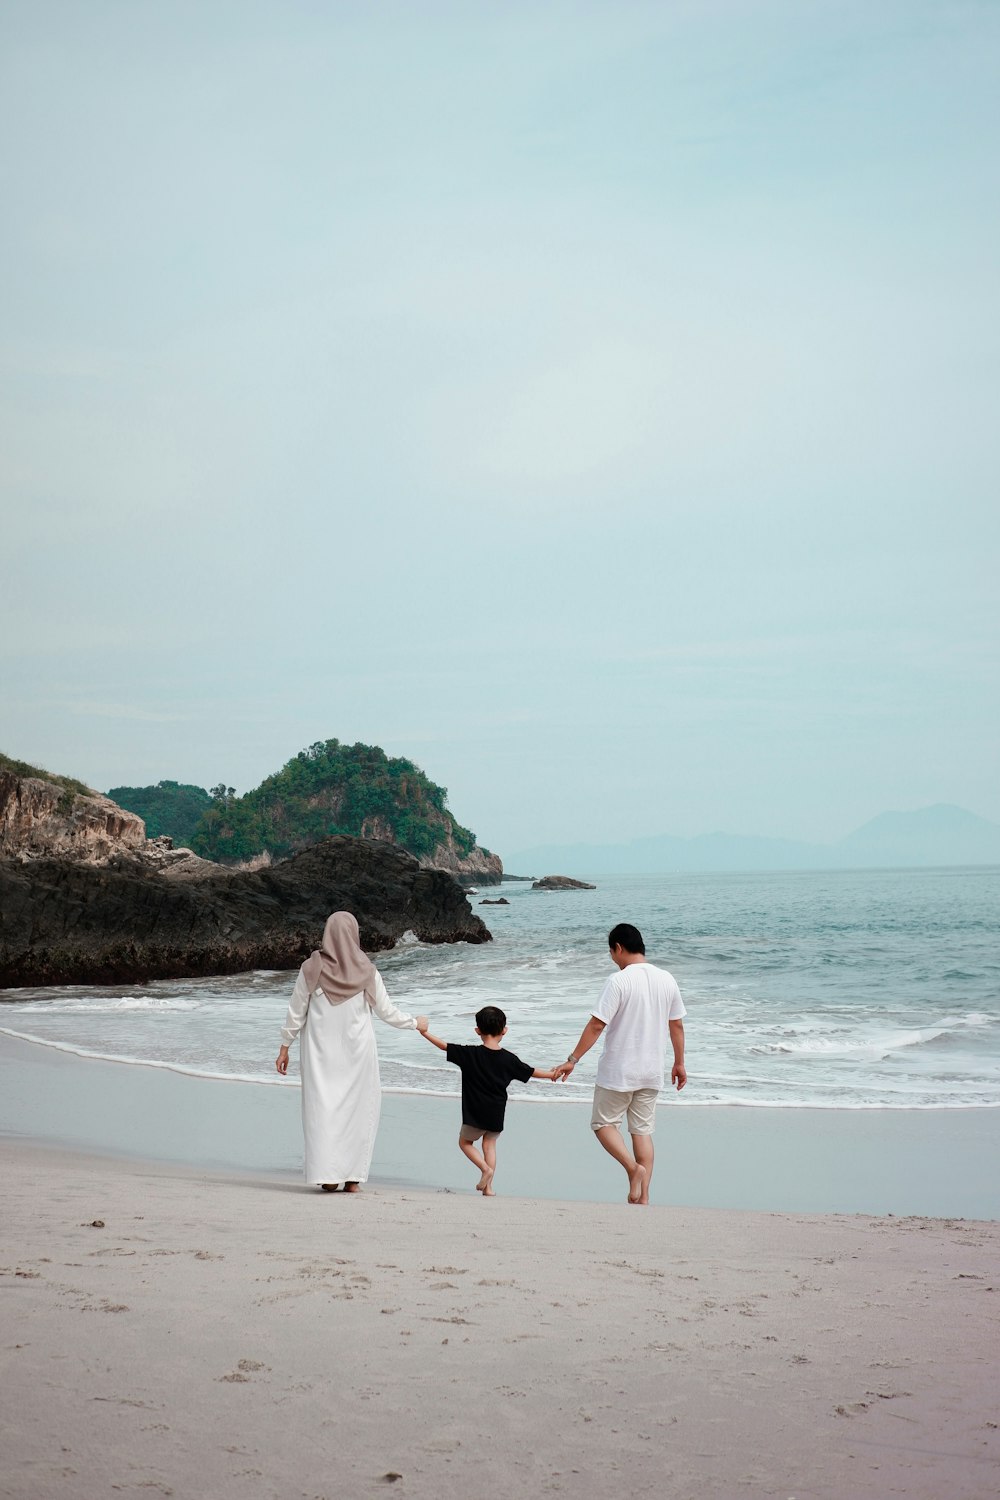 a man and woman and a child walking on a beach